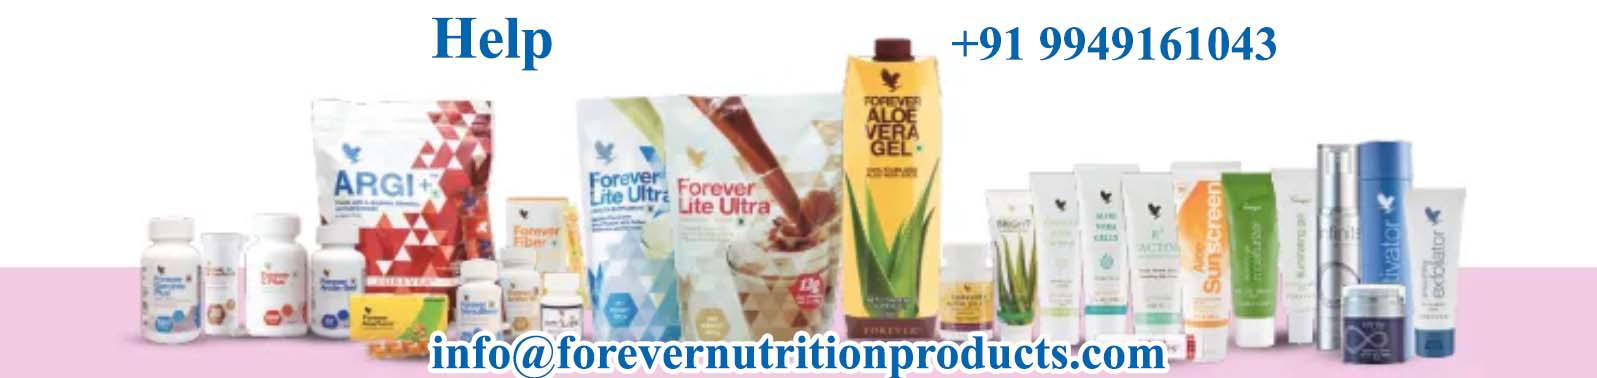 Forever Living Nutrition Products